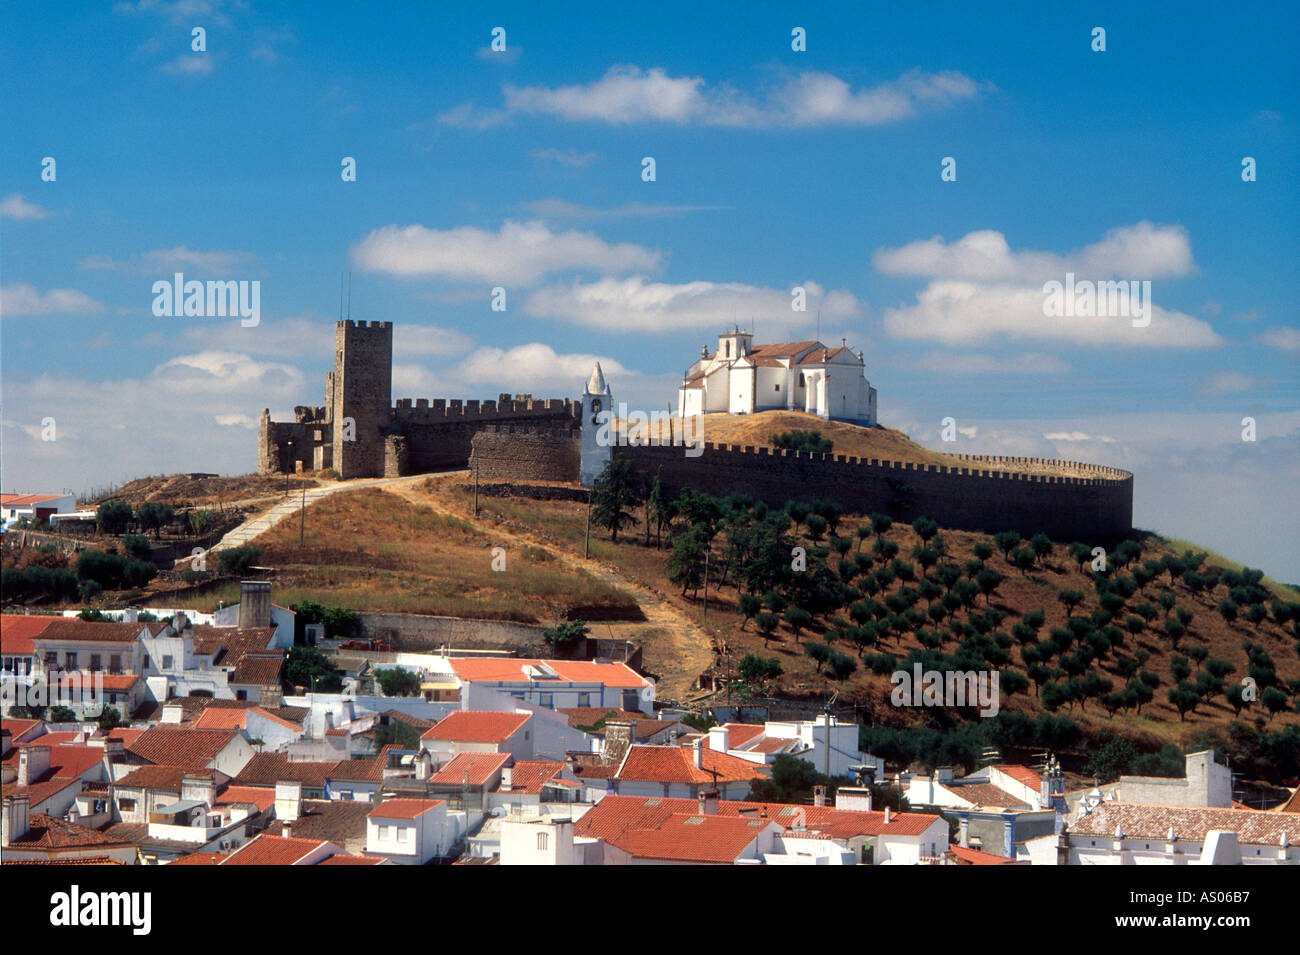 Portugal Arraiolos typical Alentego Region Village with ruined castle and whitewashed village houses famous for tapestries Stock Photo